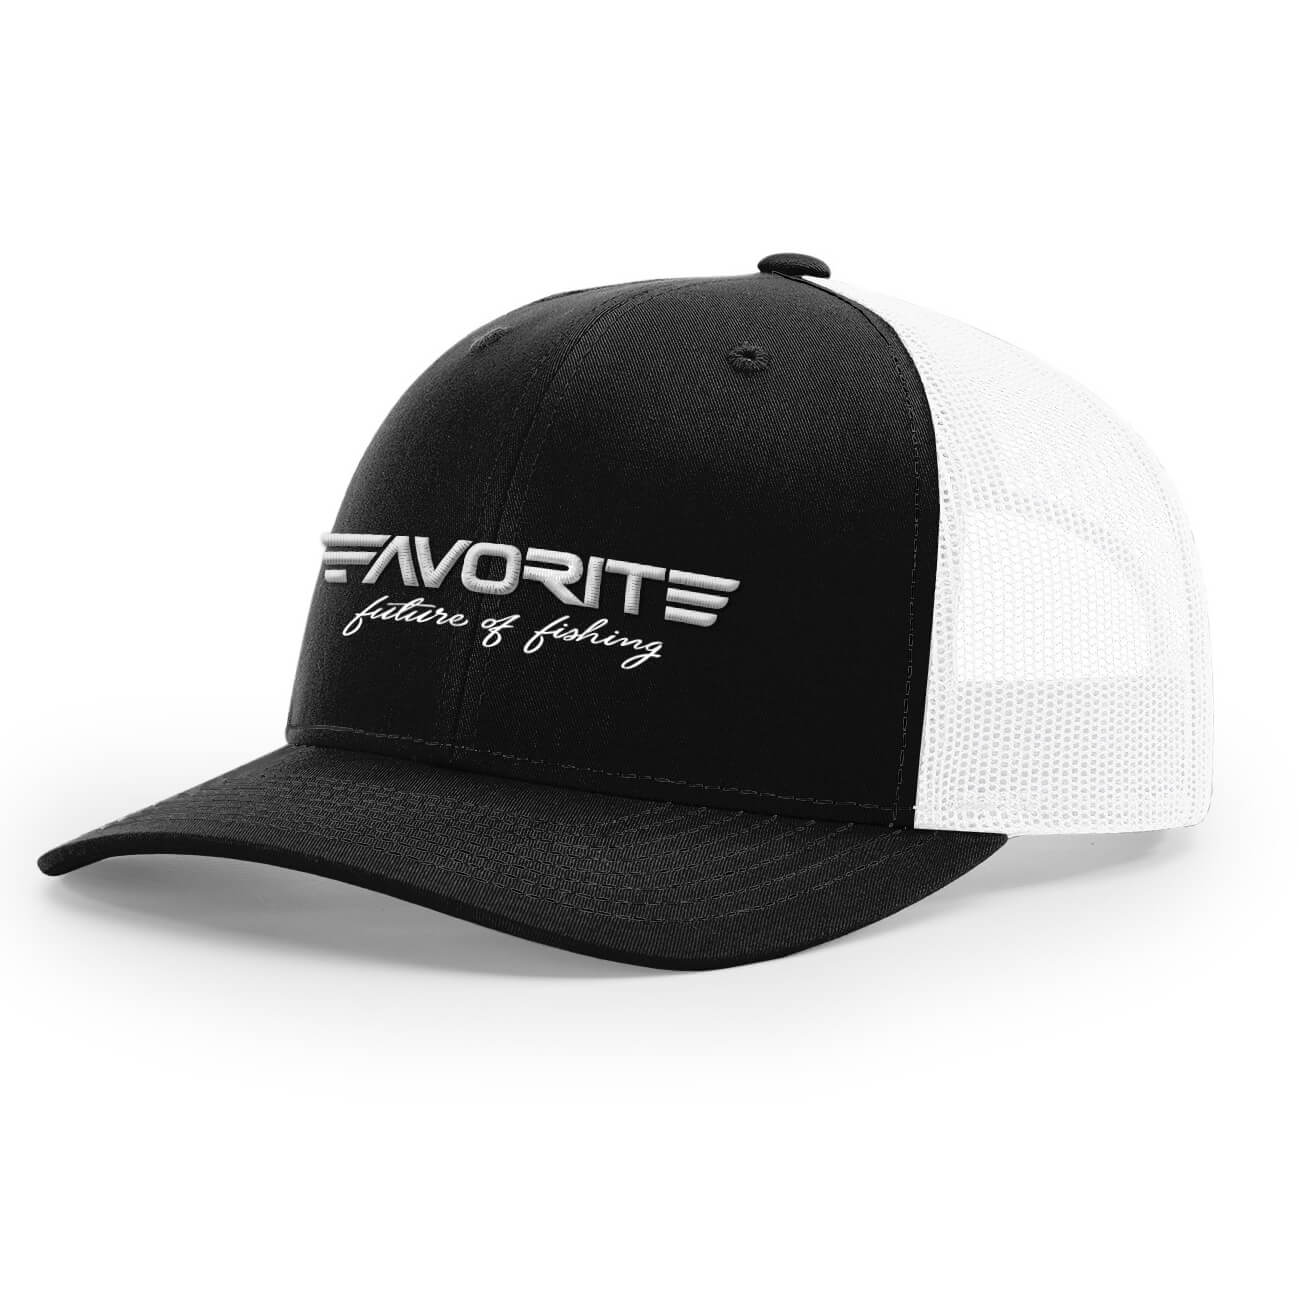 Our Best-Selling Fishing Hat design got a little #Reboot. The